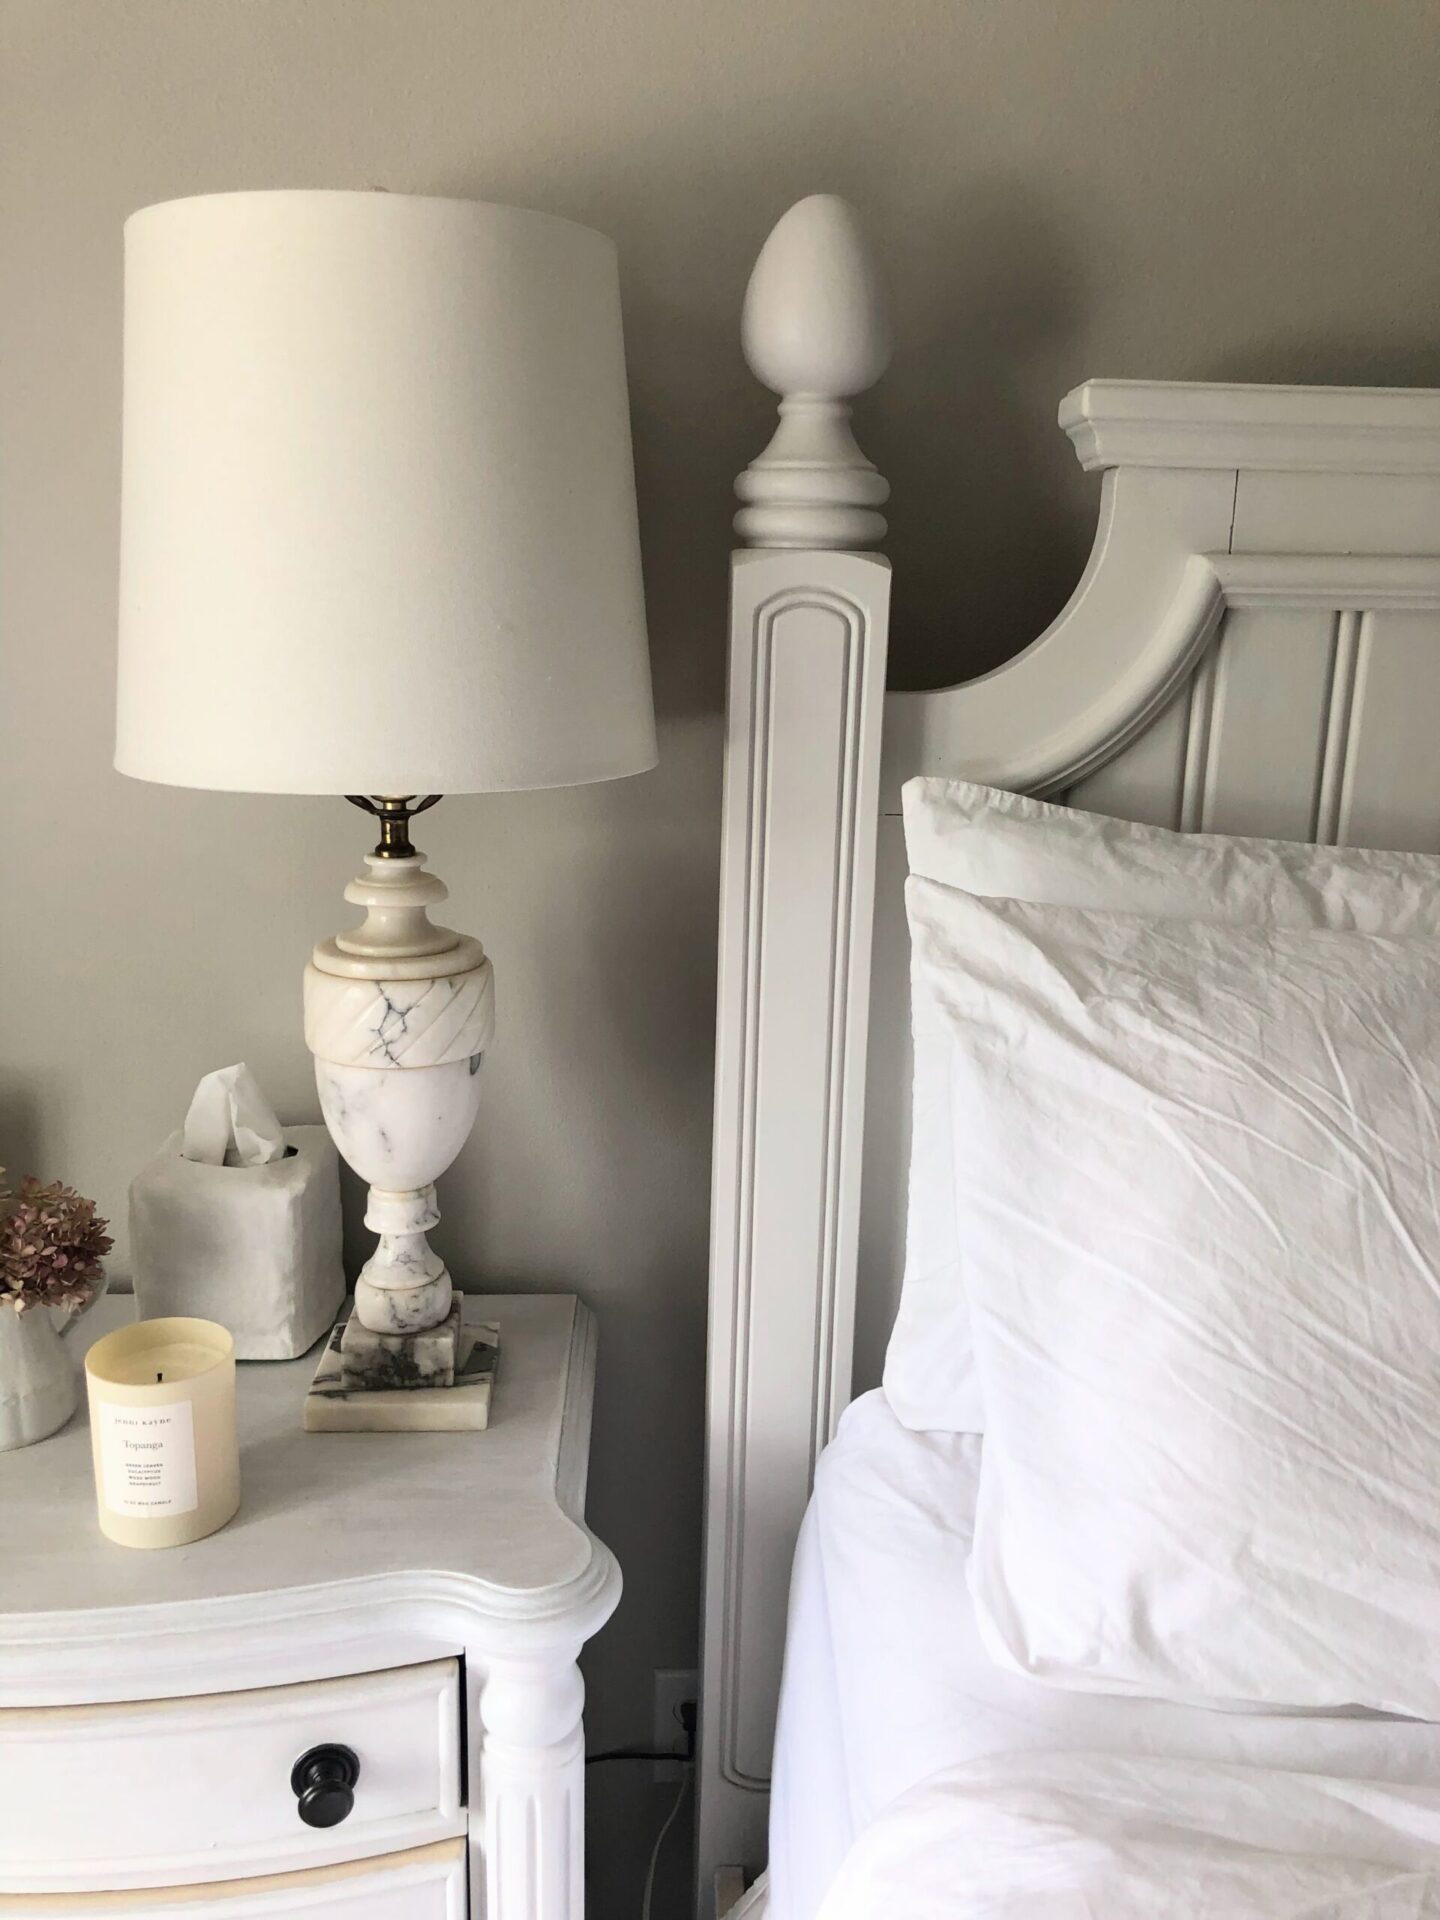 Organic cotton pillowcases (American Blossom Linens) on bed in our French country bedroom with vintage marble lamp and Topanga candle (Jenni Kayne) and SW Agreeable Gray walls. #sherwinwilliamsagreeablegray